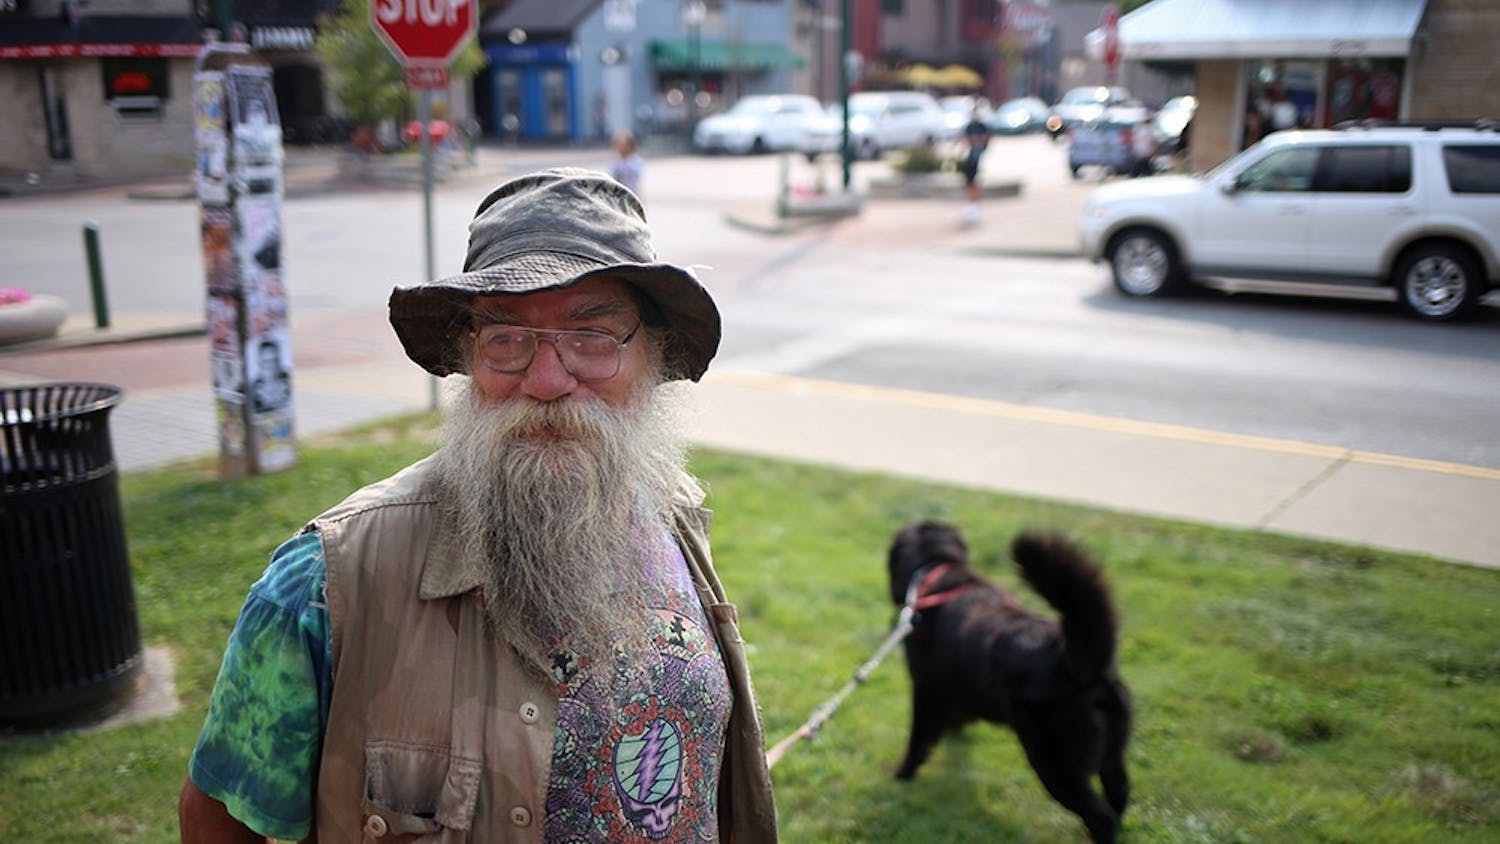 Rod Gesner, Bloomington, is known around downtown for parking his RV on Kirkwood to practice his ministry and share his wares - wooden rods that he makes. He calls his dog, Kiaayo, a "comfort/therapy wonder dog." Gesner serves as one of the few links between the homeless population on the north side of Kirkwood and the rich college kids at the bars on the south side. 